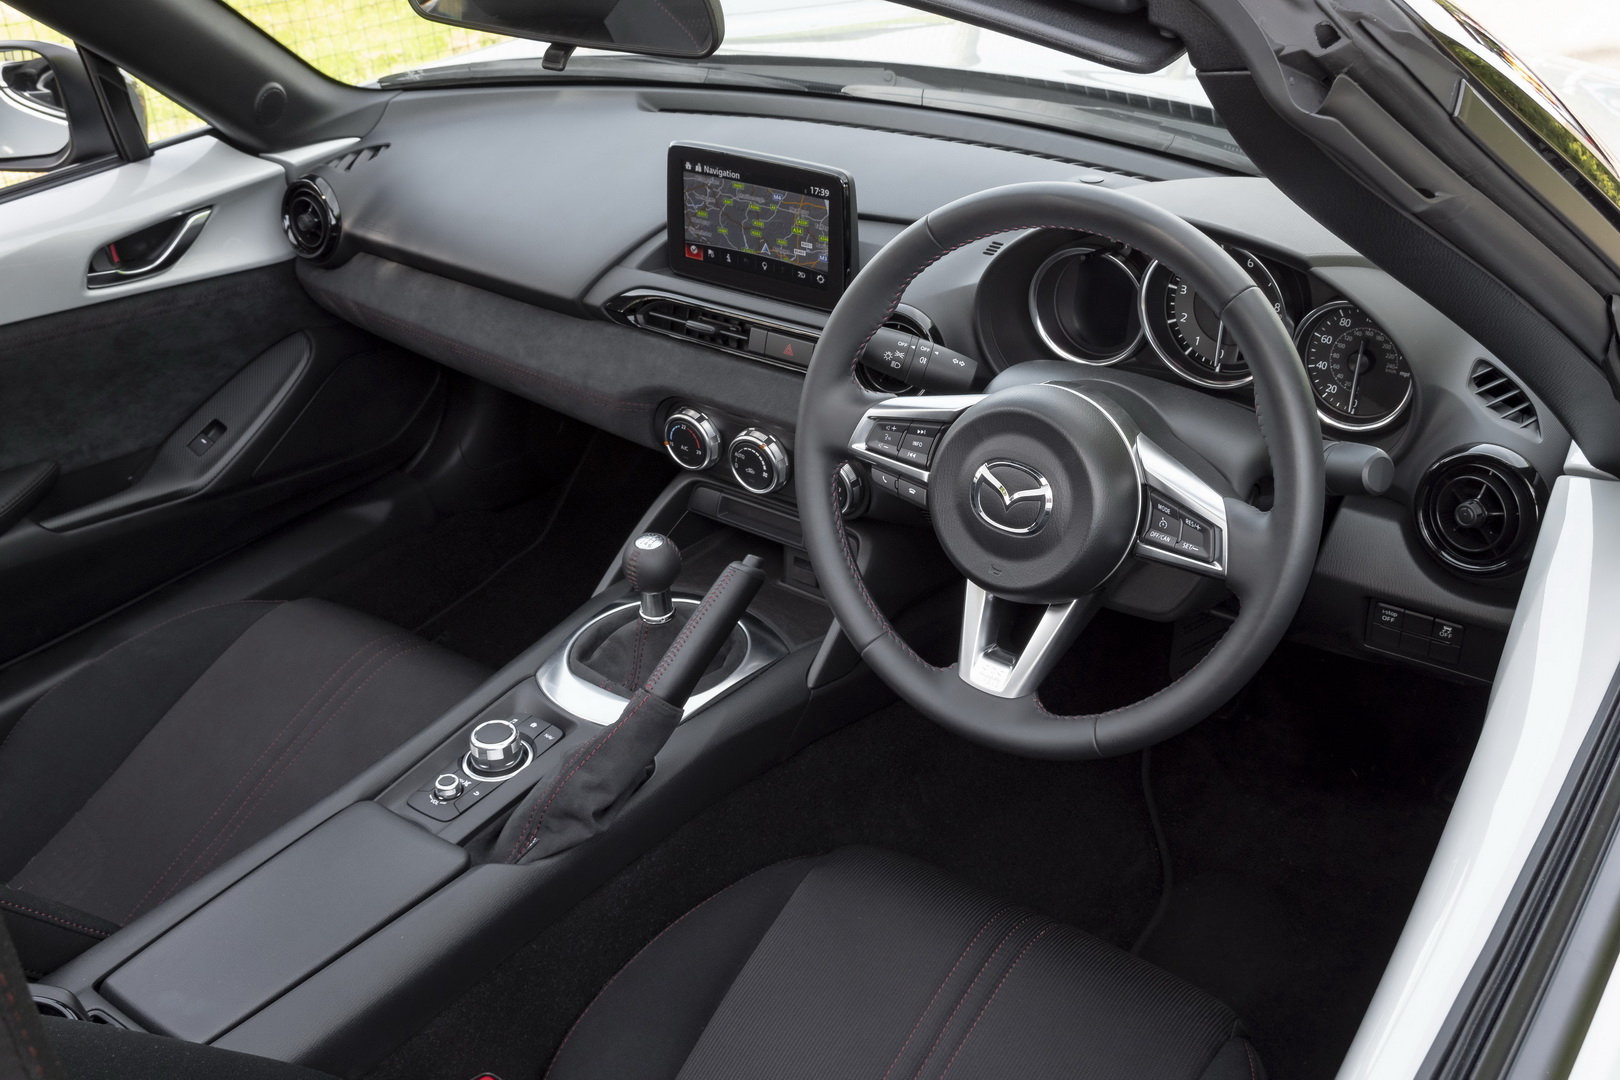 Playful aluminium Ripples Personalize Your Mazda MX-5 With The Optional Cup And Design Packs |  Carscoops